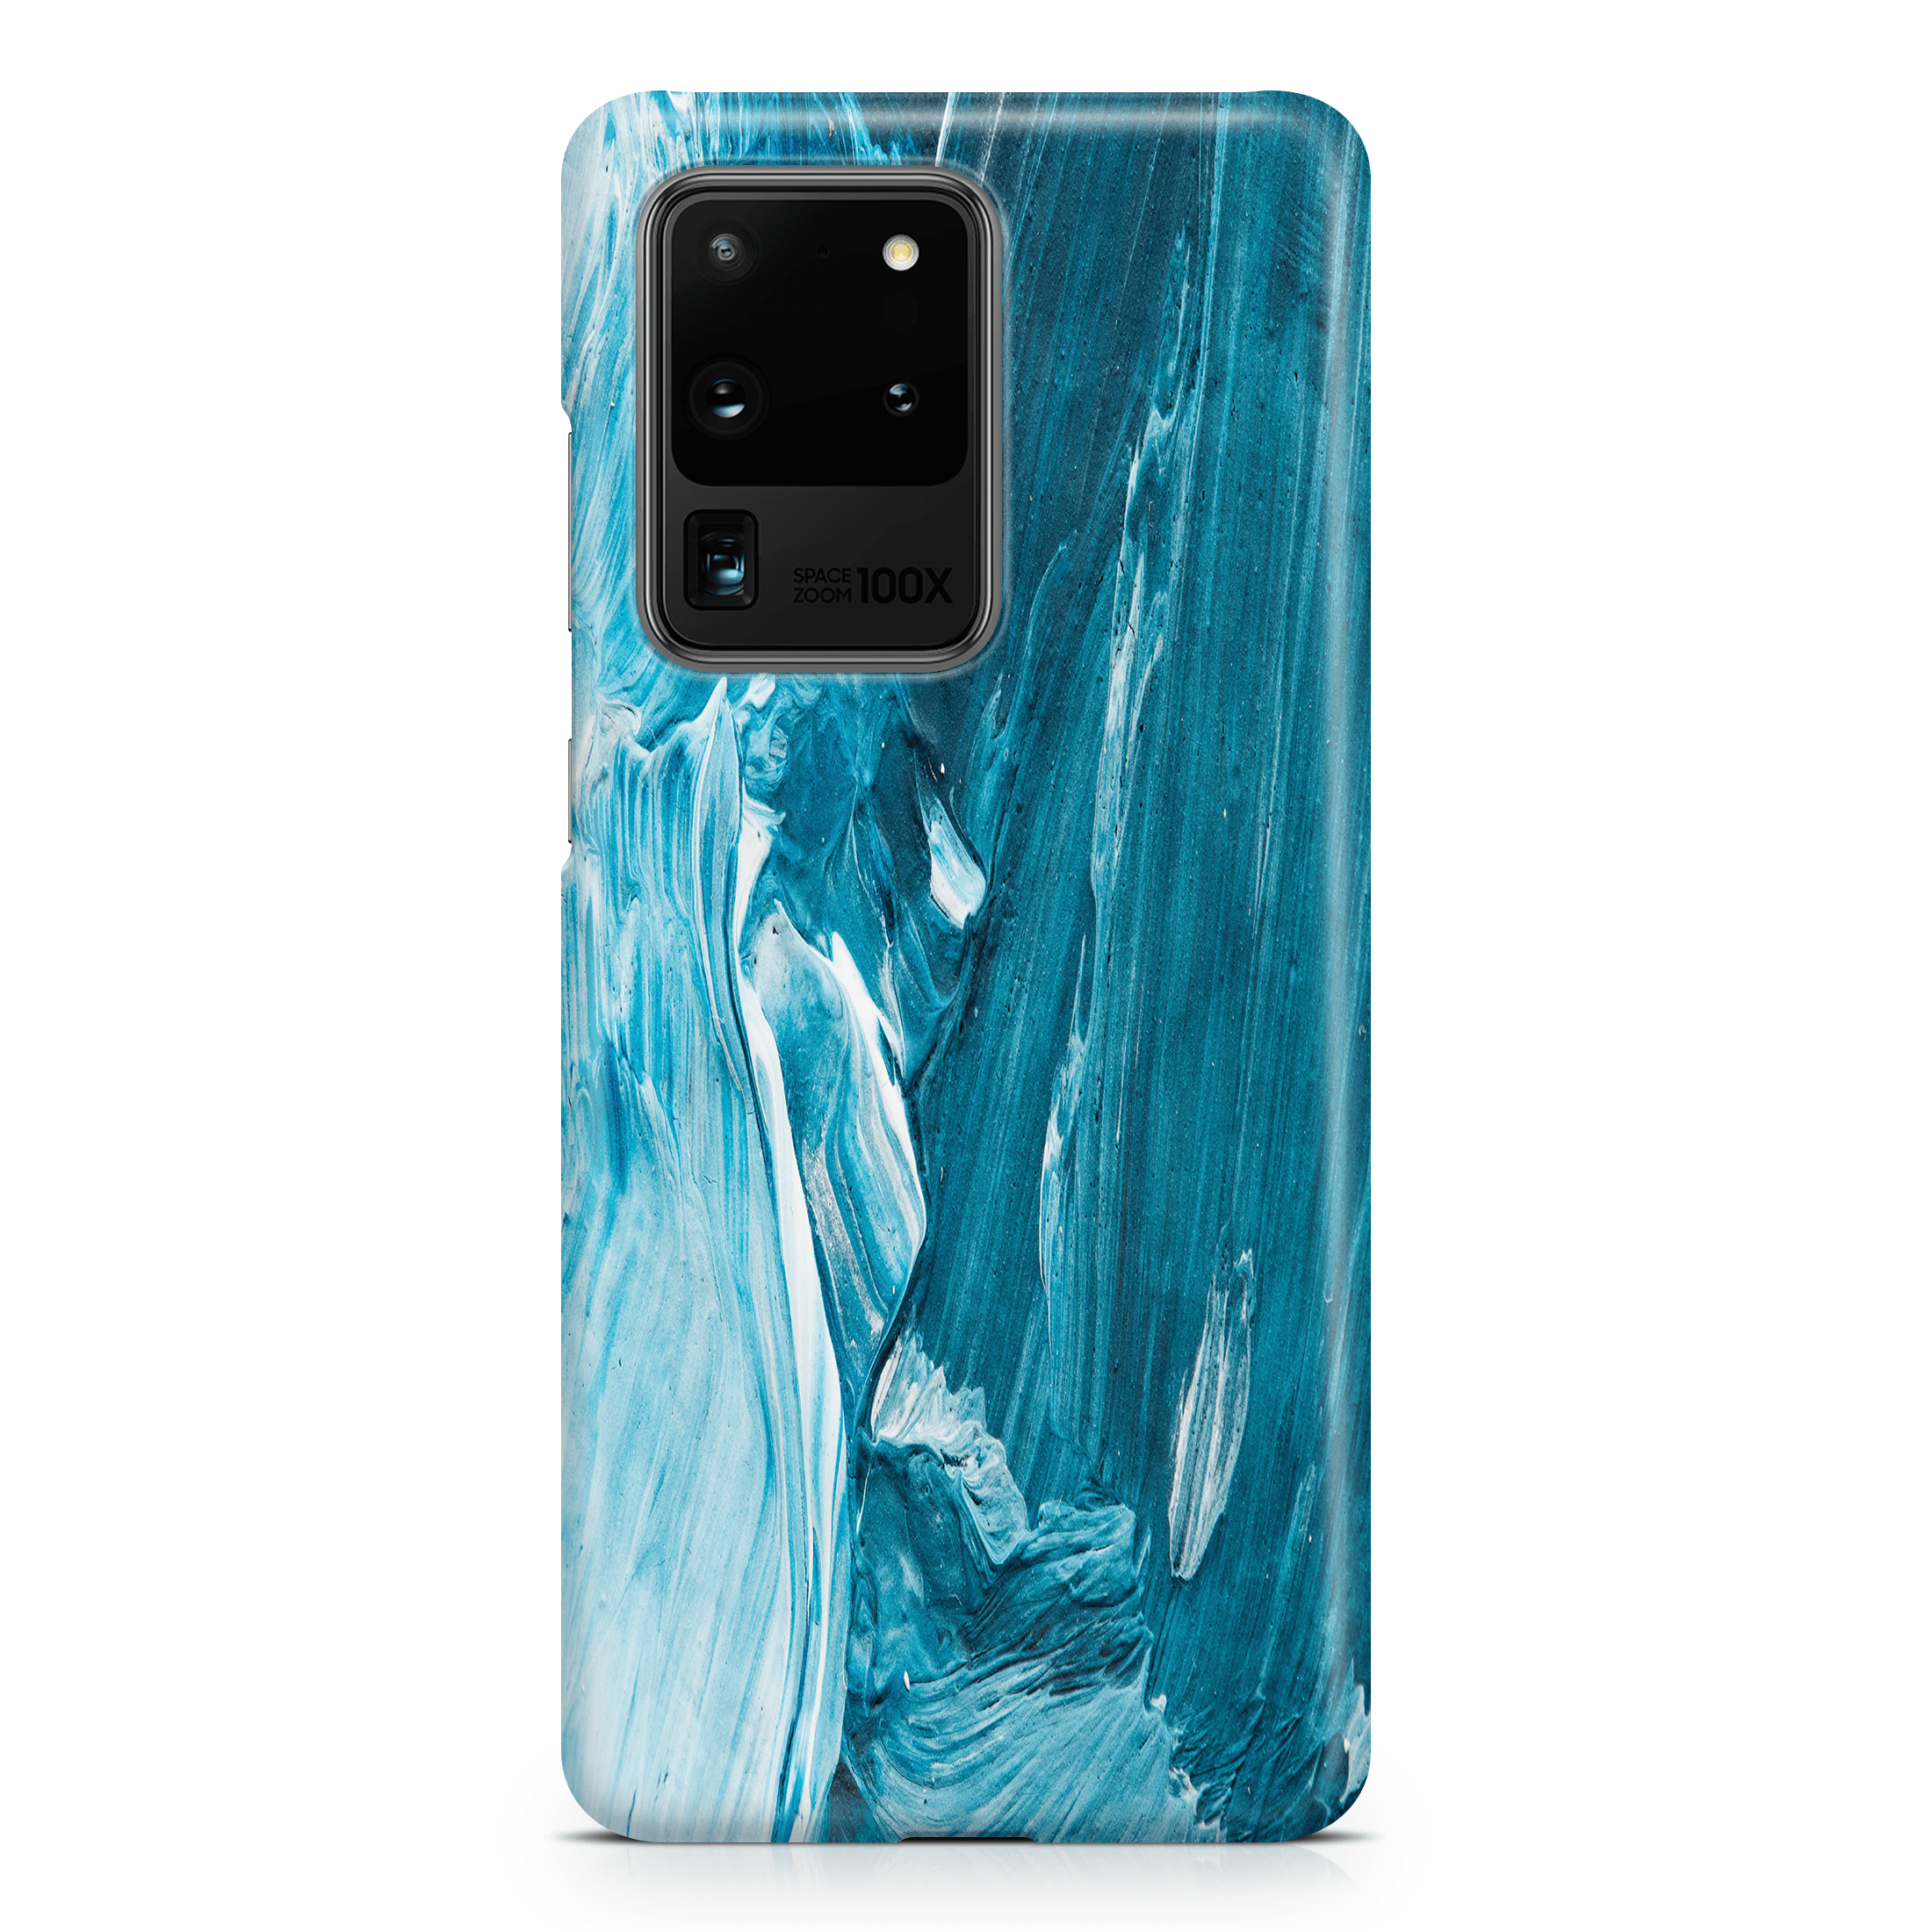 Blue Oil Paint III - Samsung phone case designs by CaseSwagger